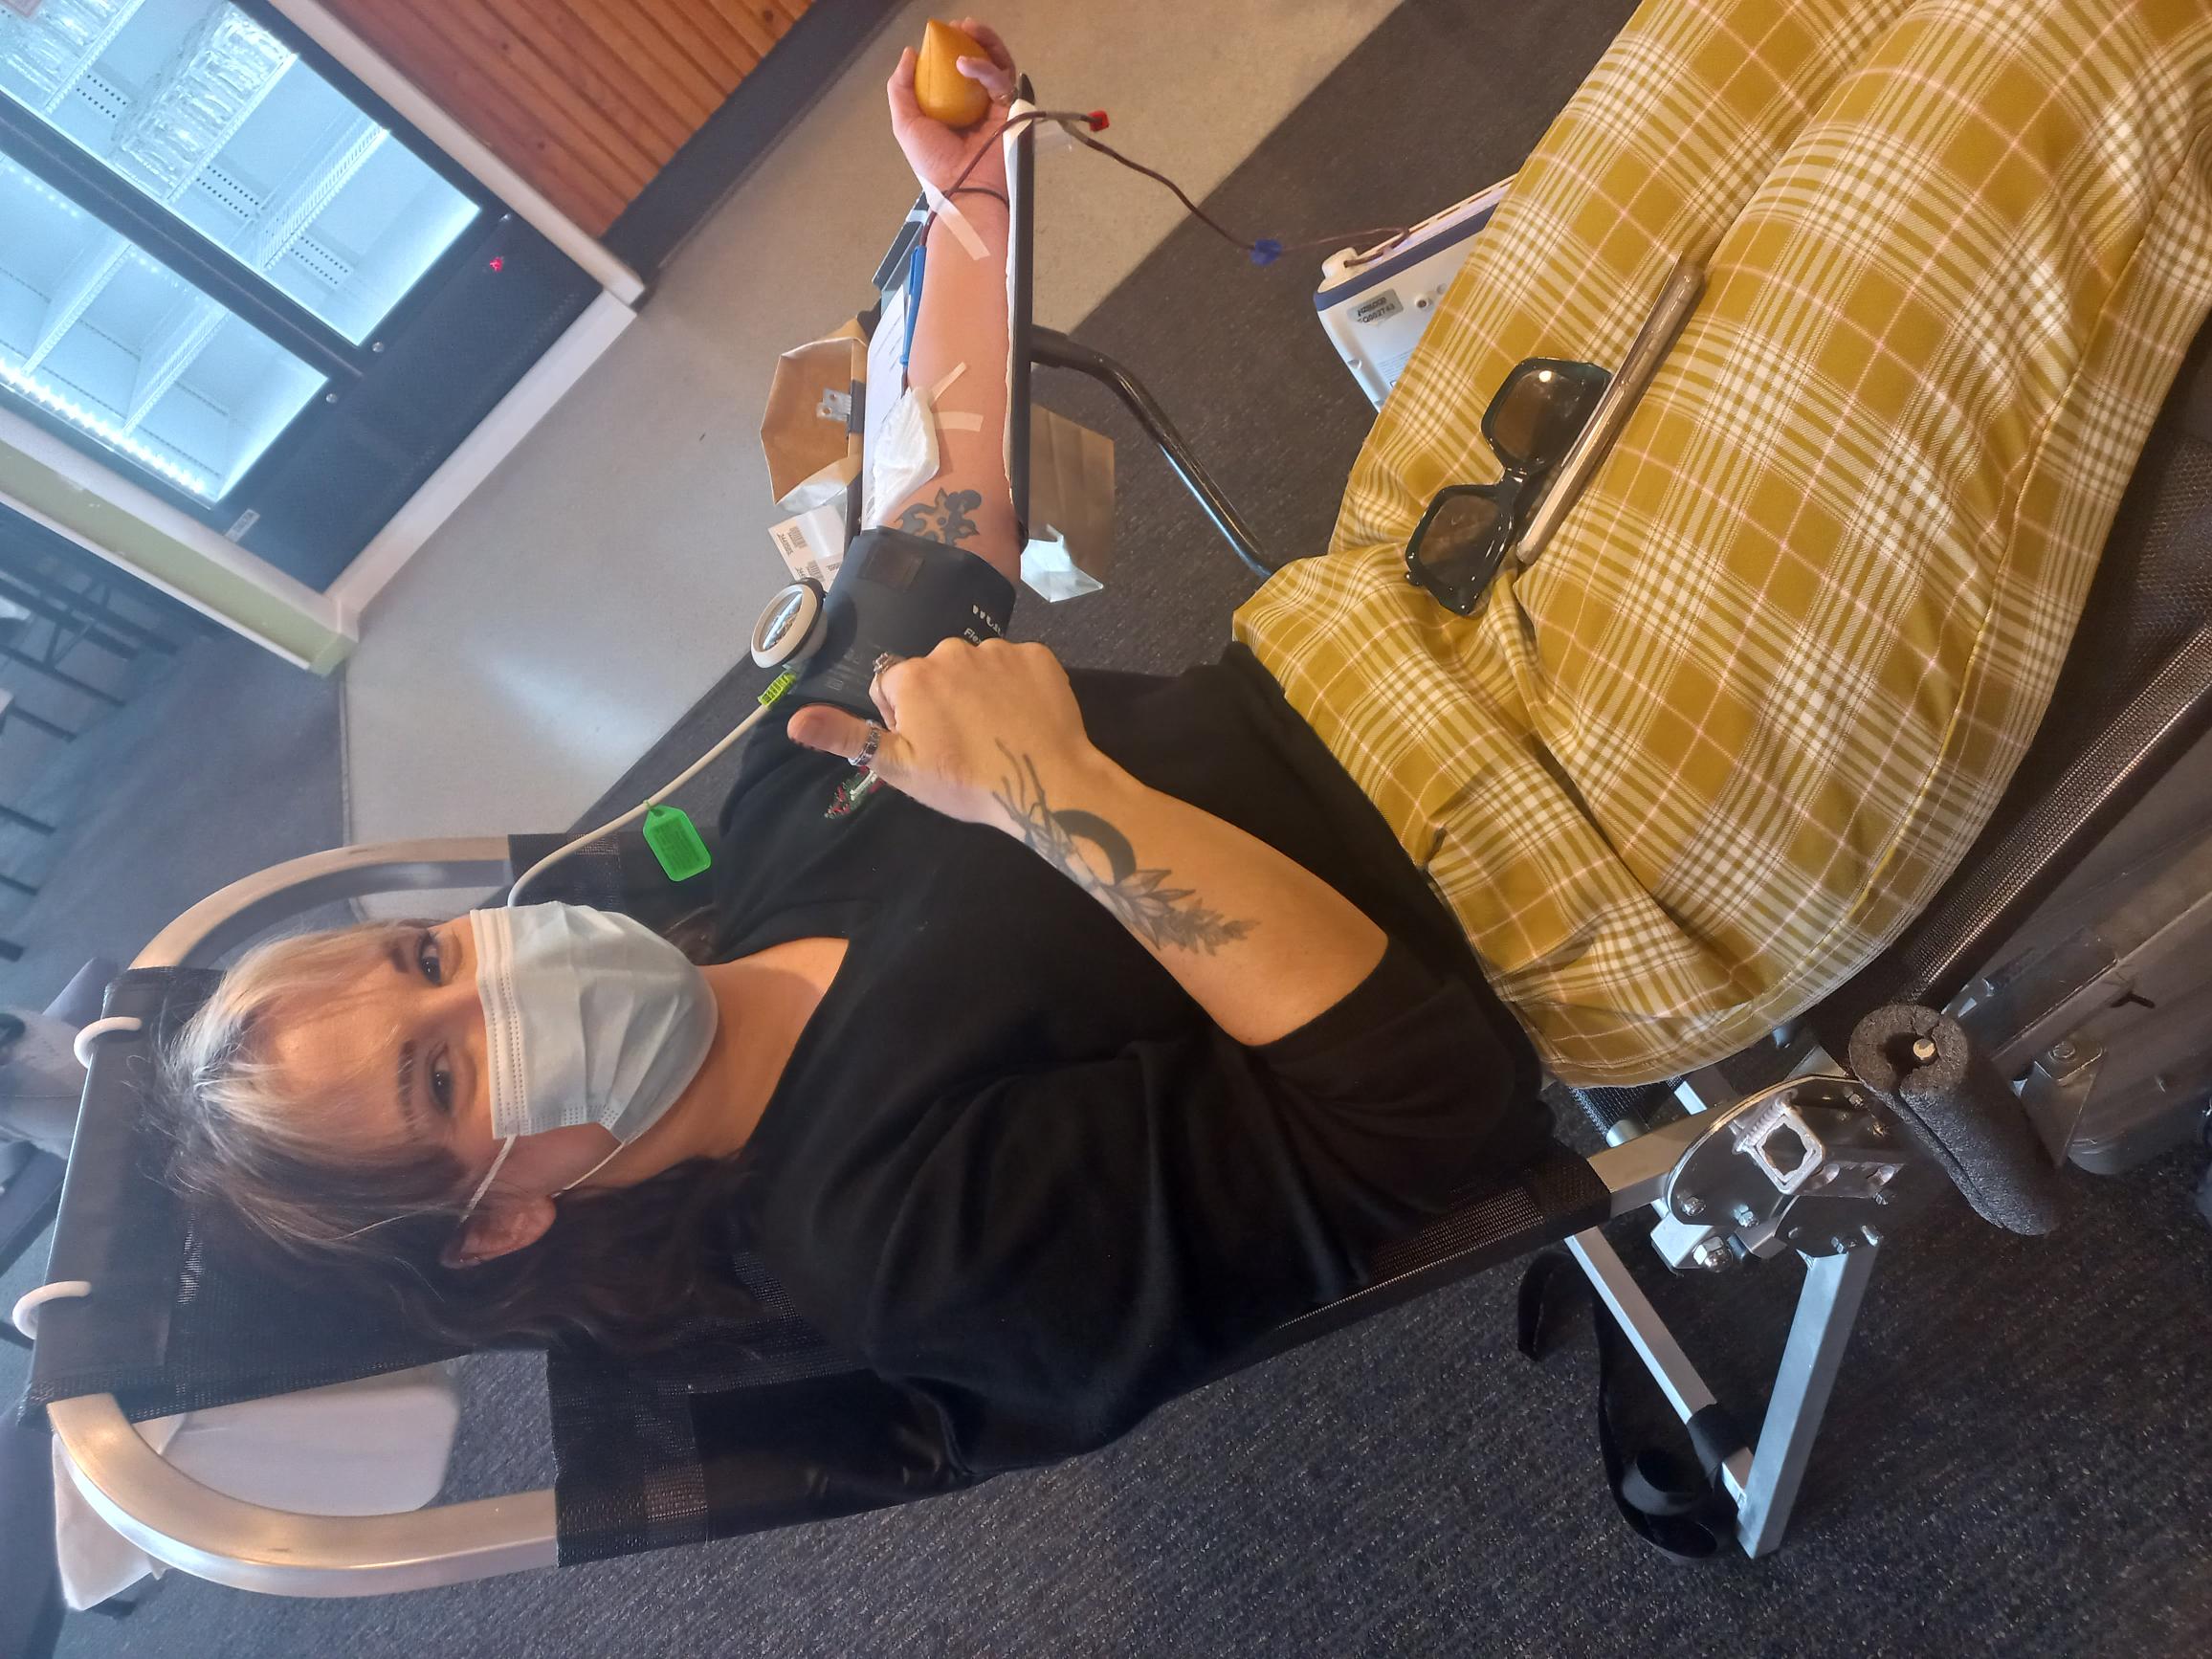 Community member gives blood at NZ Blood drive in Opotiki - September 2022